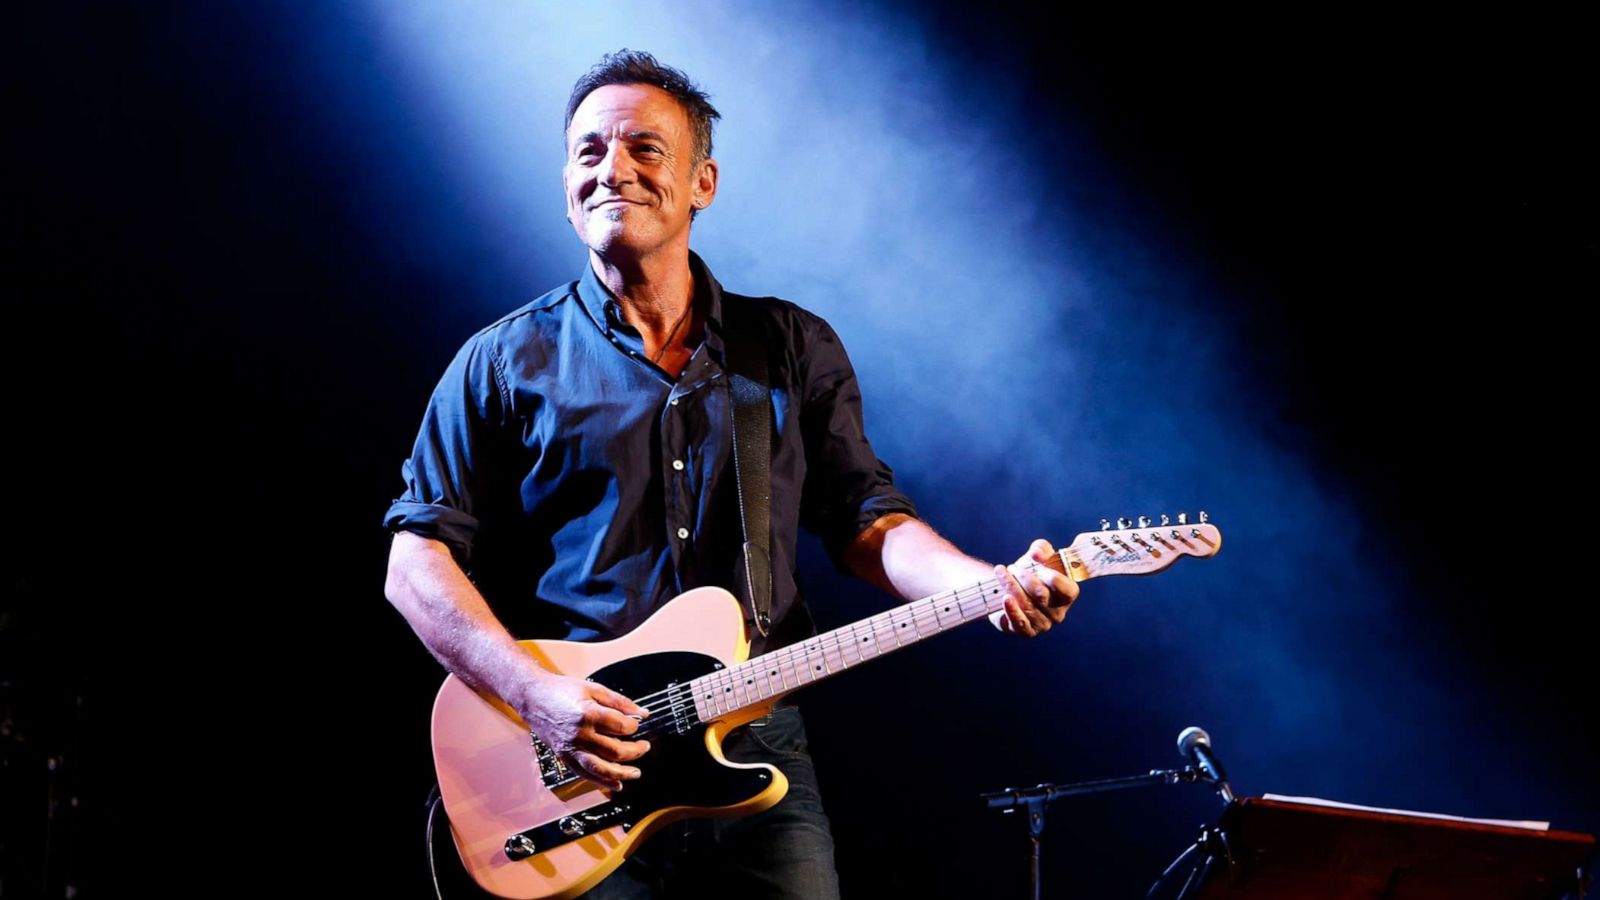 PHOTO: Bruce Springsteen performs at the 7th annual "Stand Up For Heroes" event at Madison Square Garden on Nov. 6, 2013, in New York City.